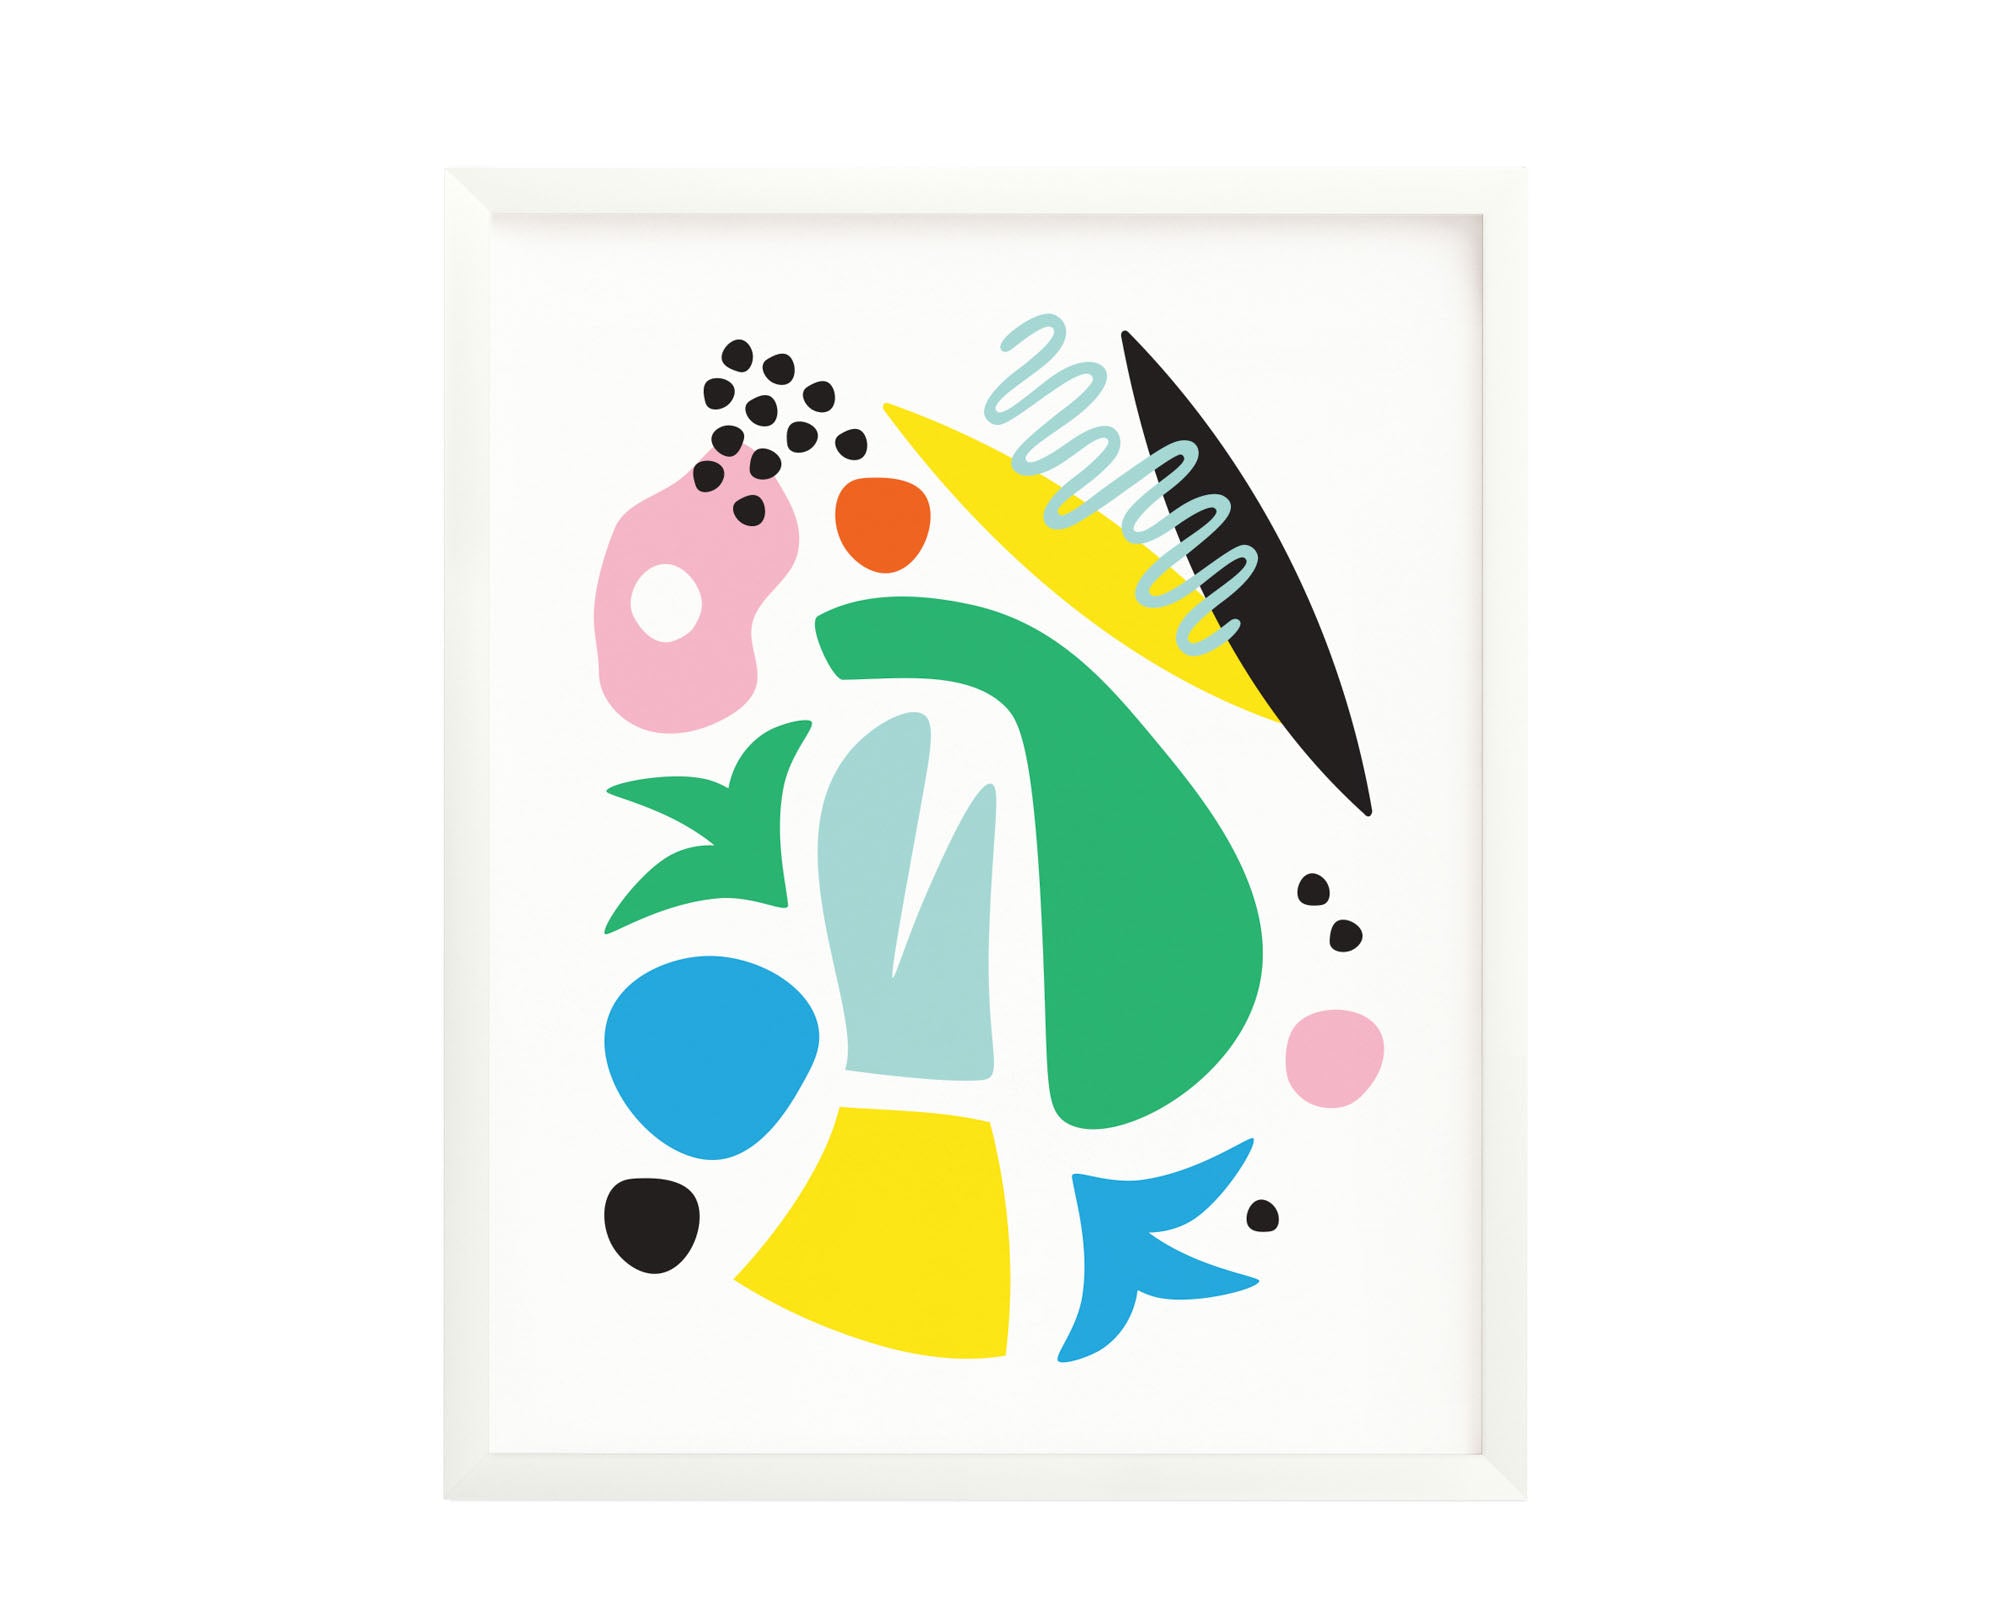 "Pool Party" Matisse inspired abstract shapes composition archival giclée art print. Made in USA by My Darlin' @mydarlin_bk